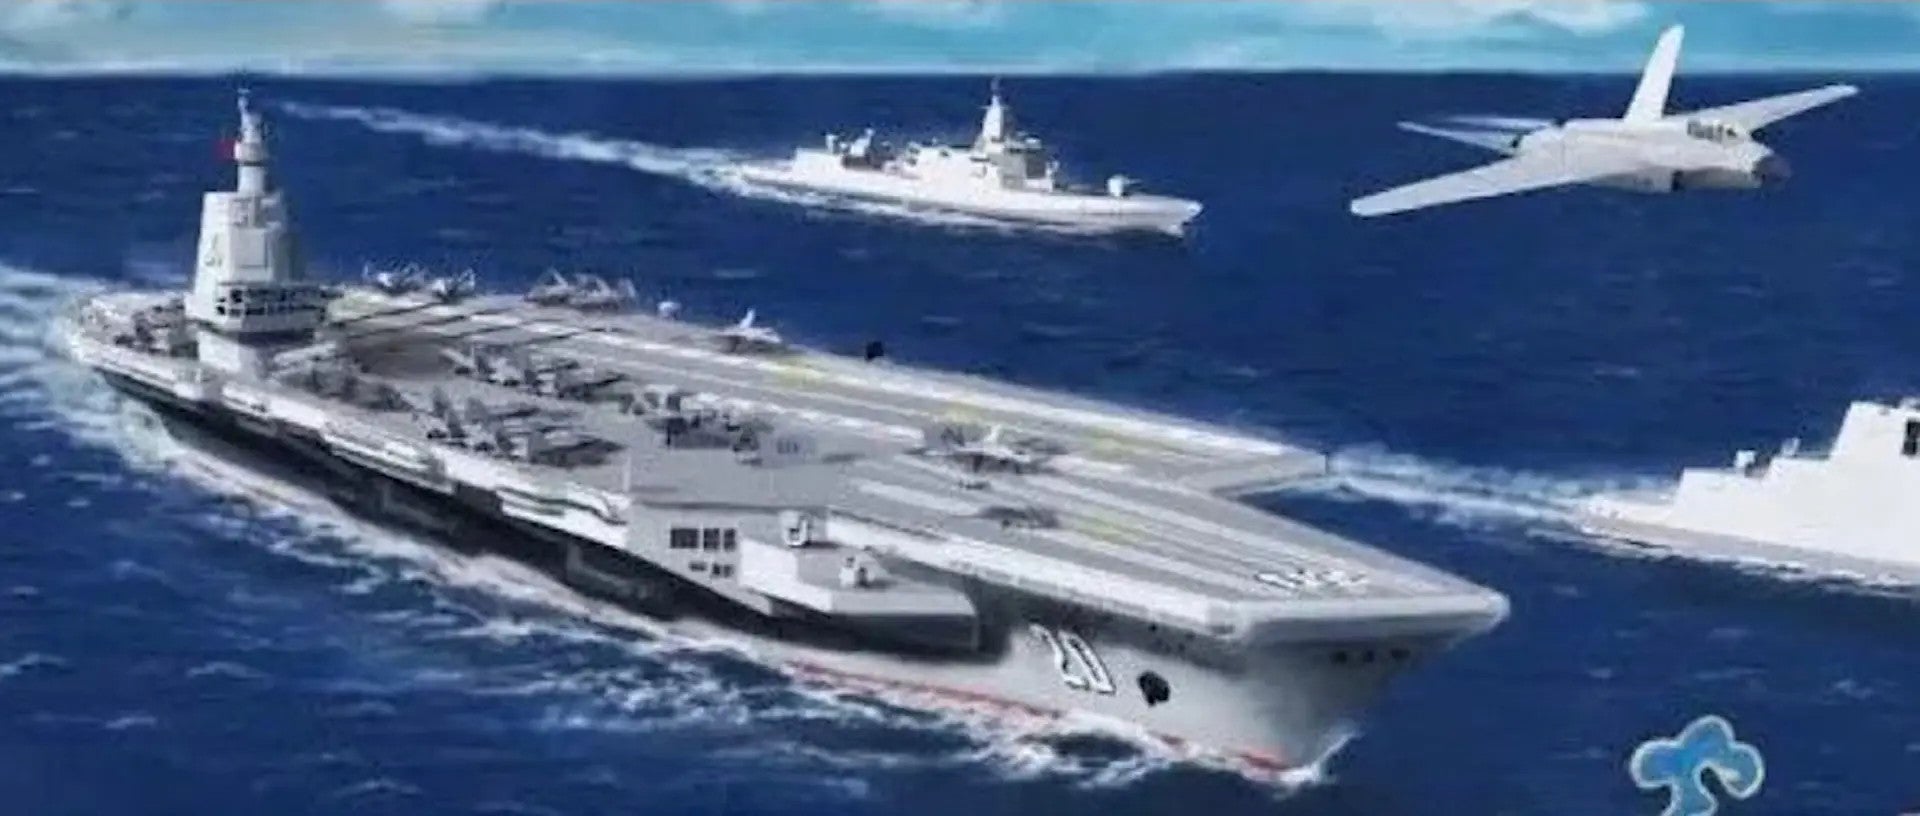 china's new aircraft carrier begins catapult testing